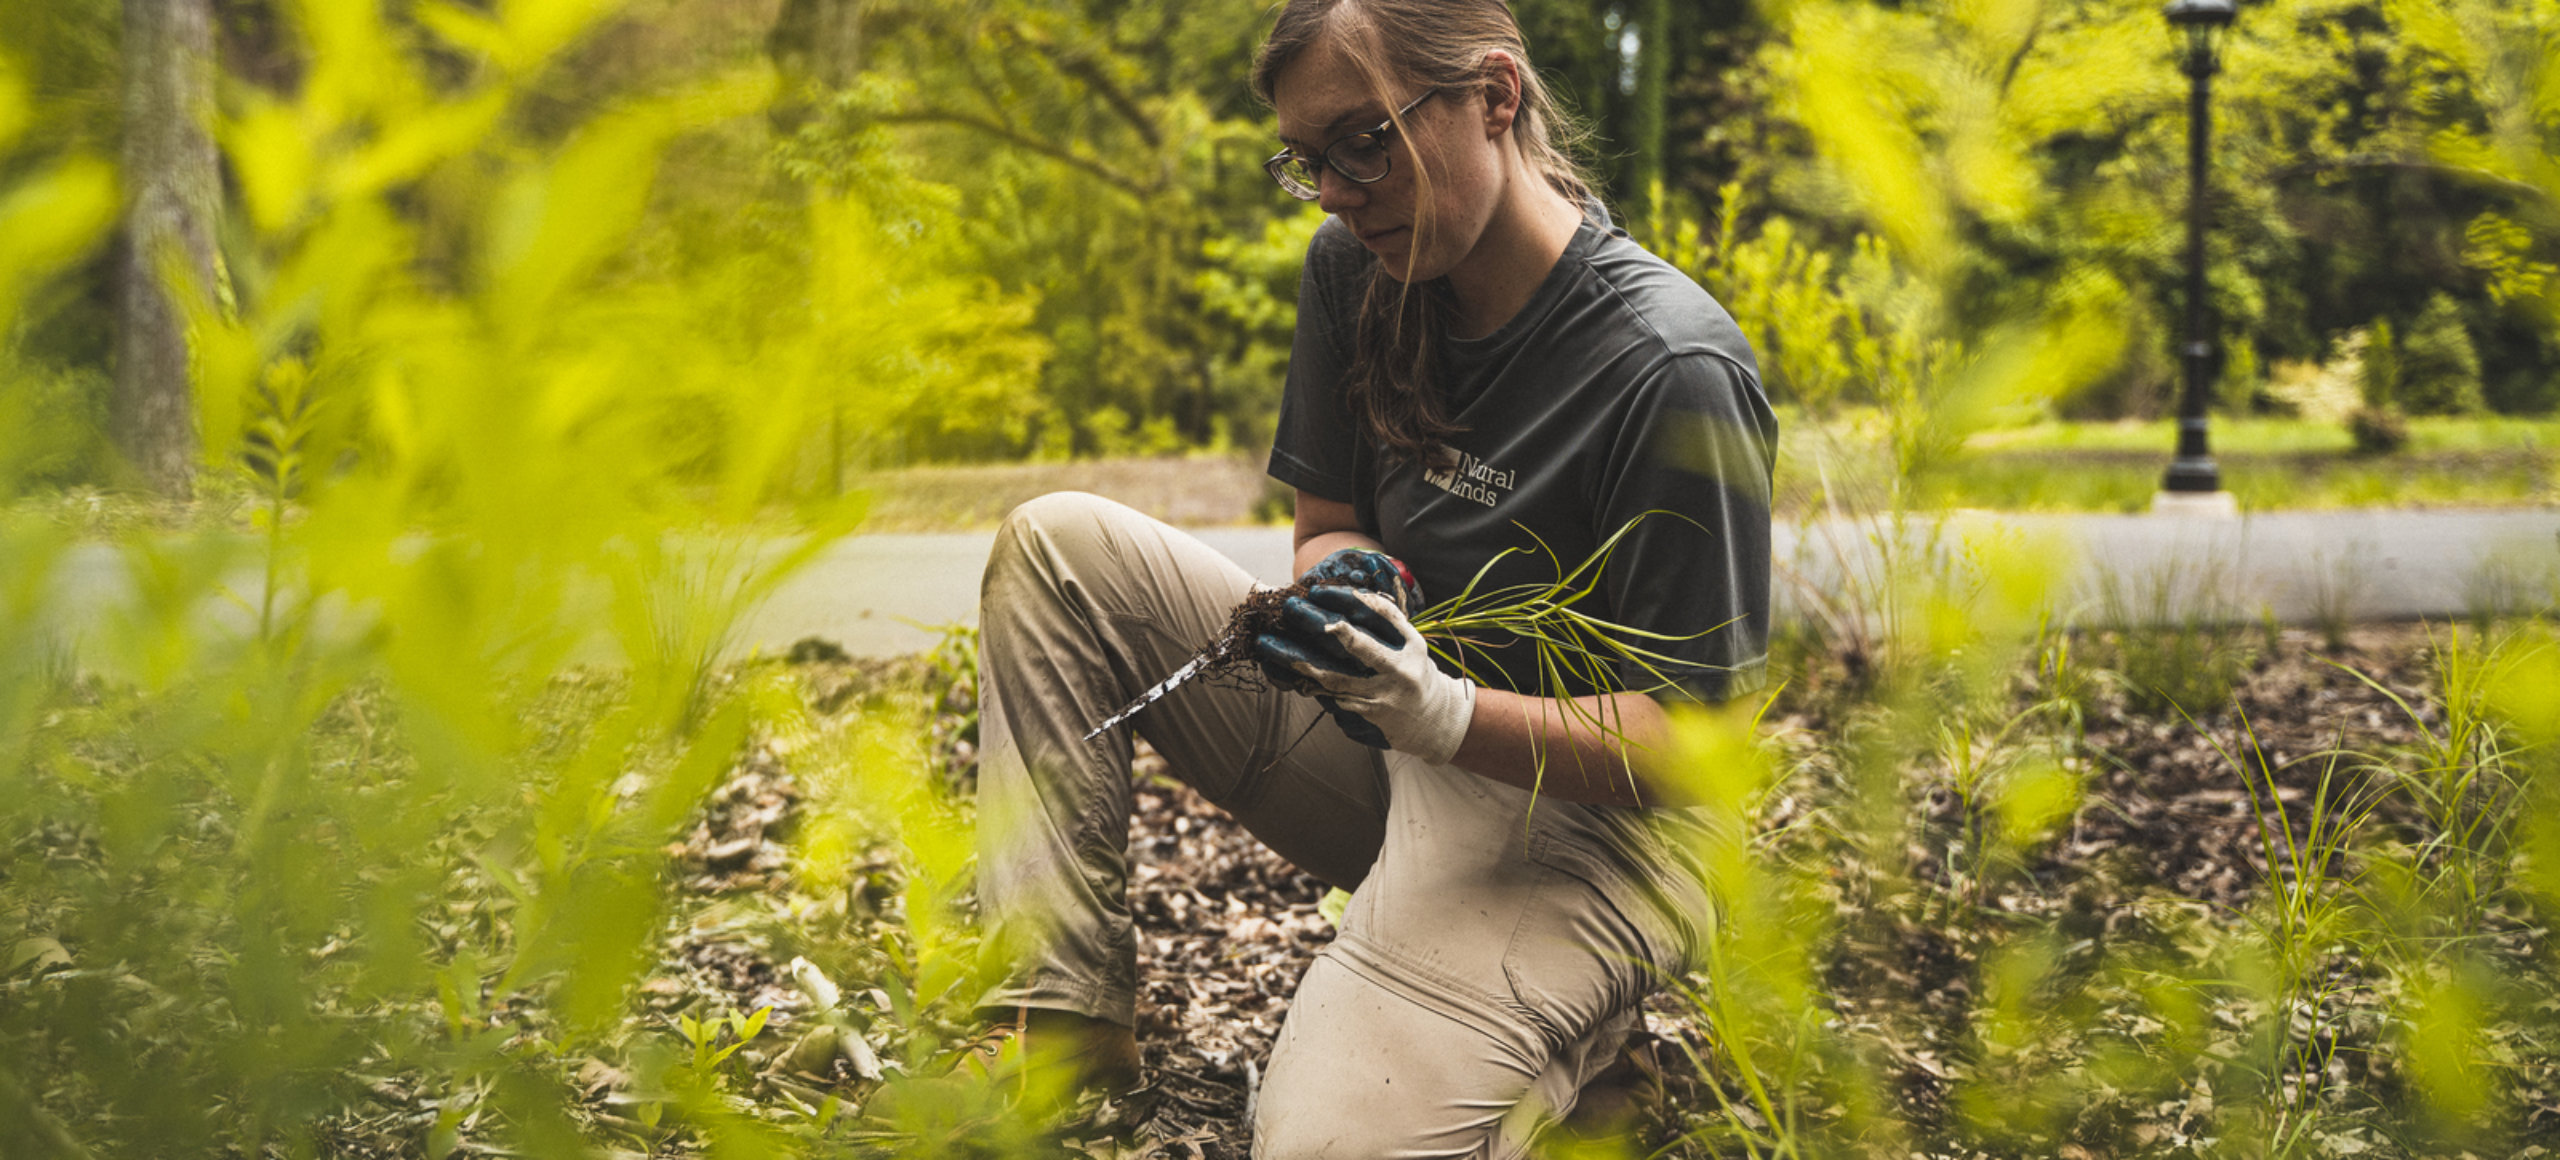 A person wearing a gray shirt and cargo pants kneels on one knee in a preserve while holding a plant and small stake in dirty, gloved hands.